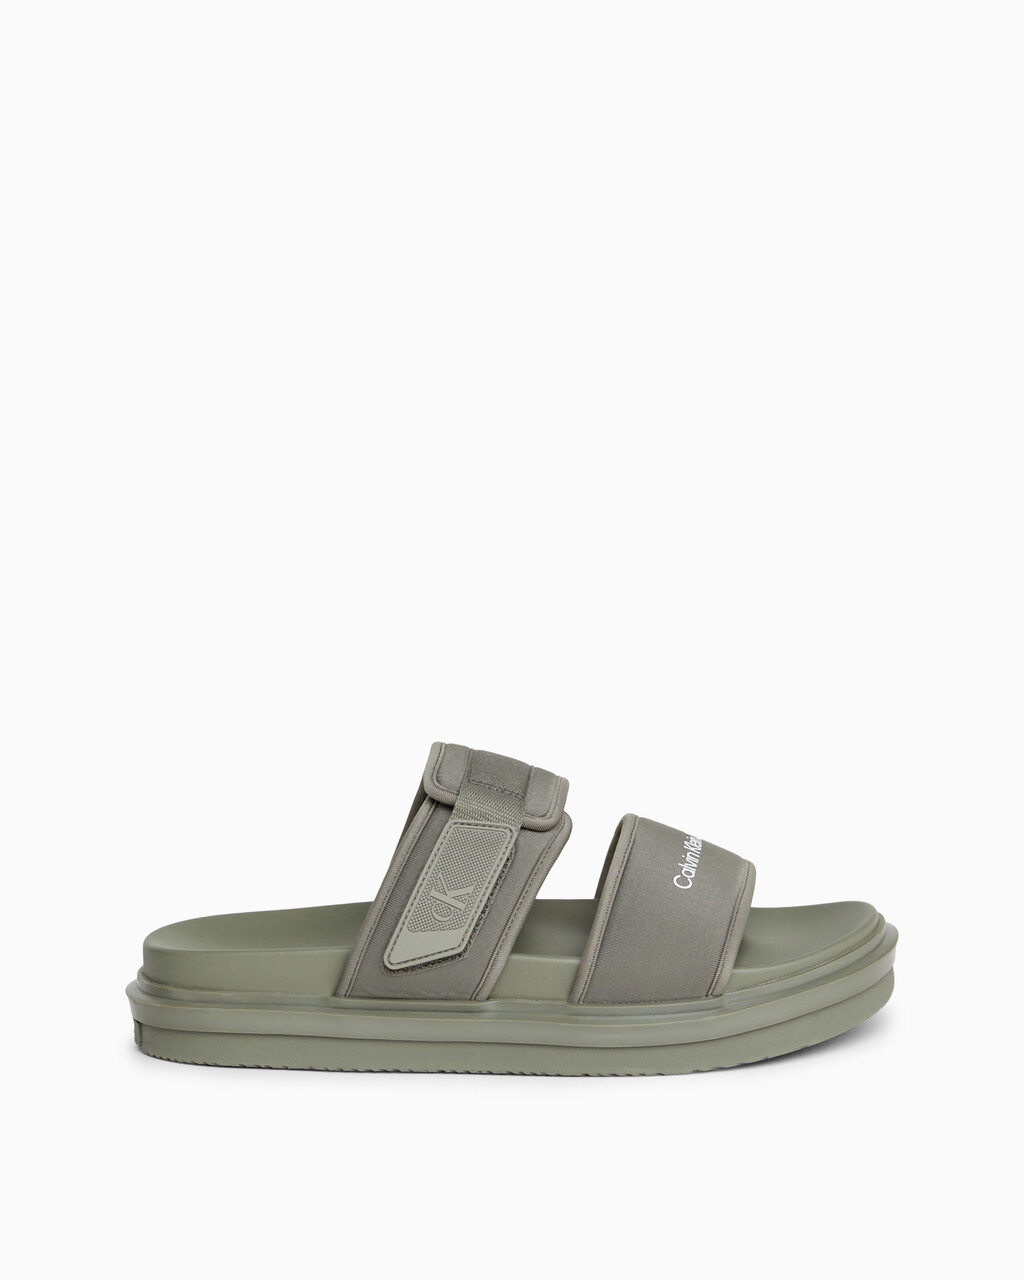 Sandals, DUSTY OLIVE/GRN, hi-res